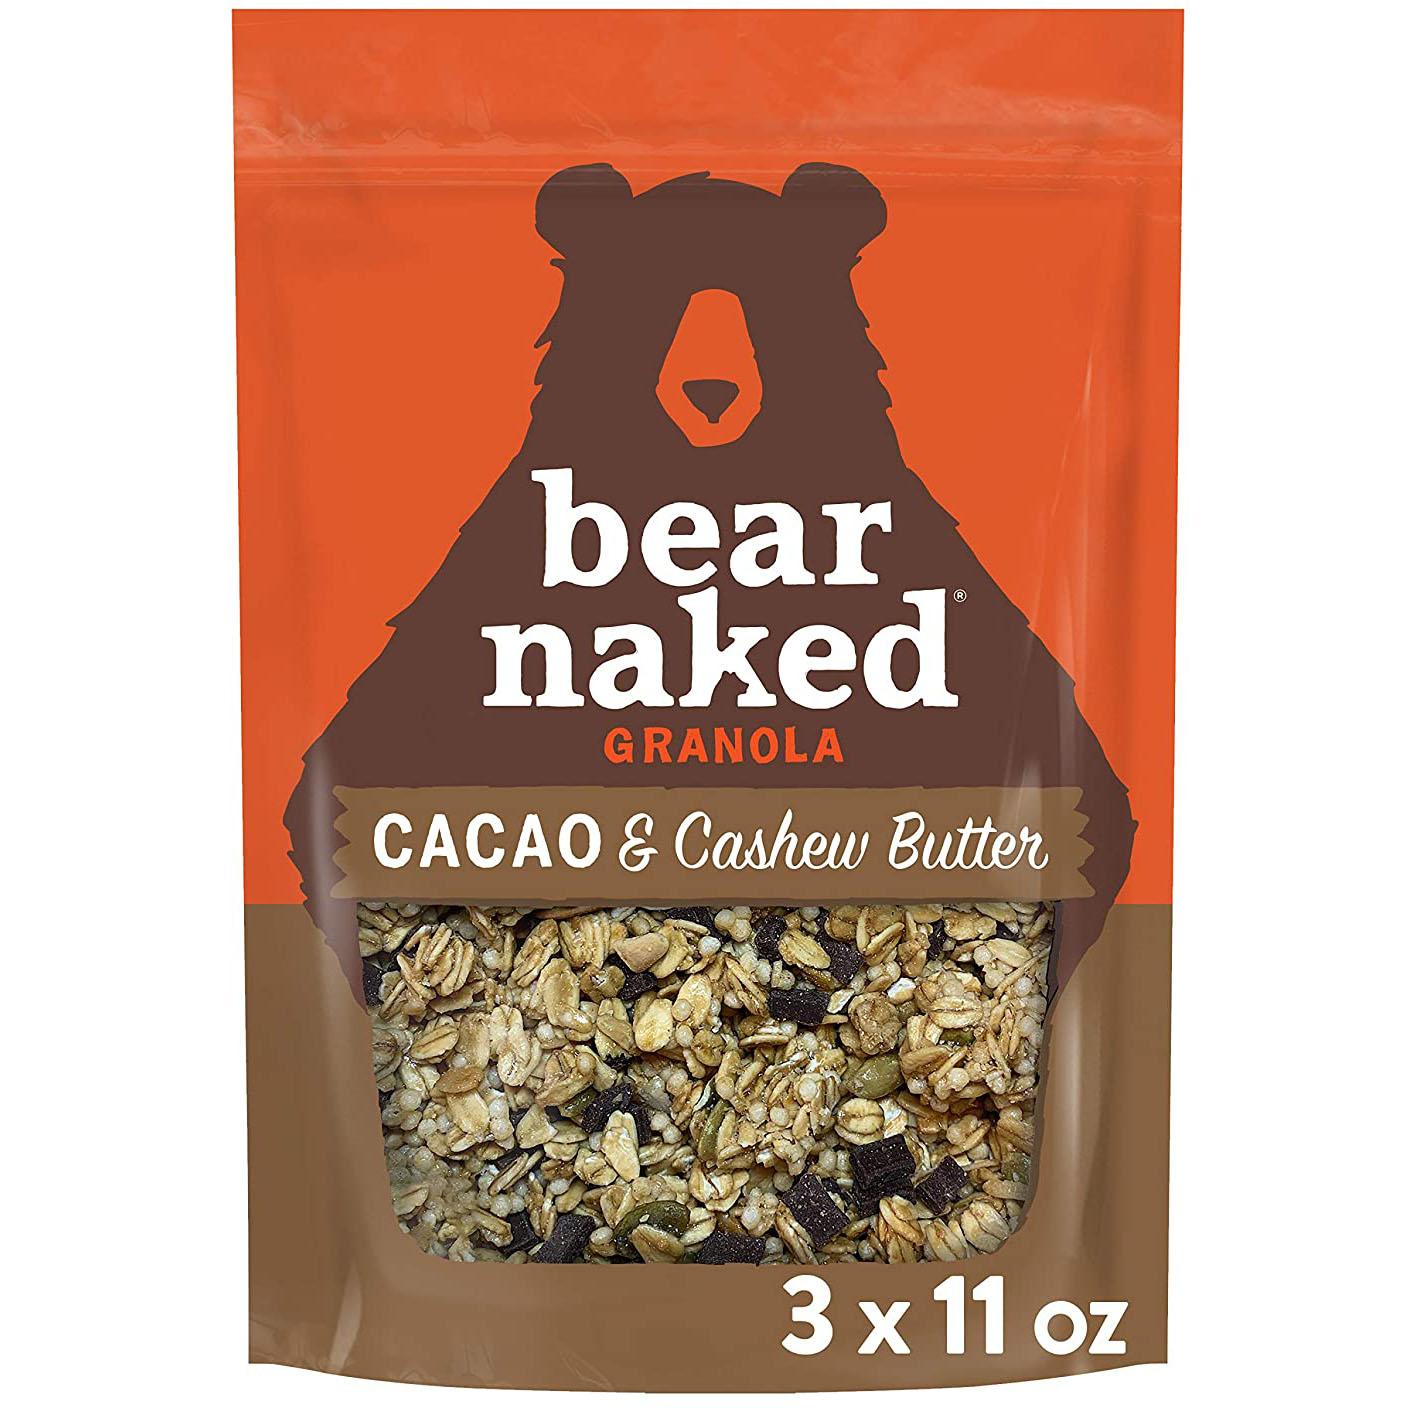 3 Bear Naked Cacao and Cashew Butter Granola for $8.86 Shipped